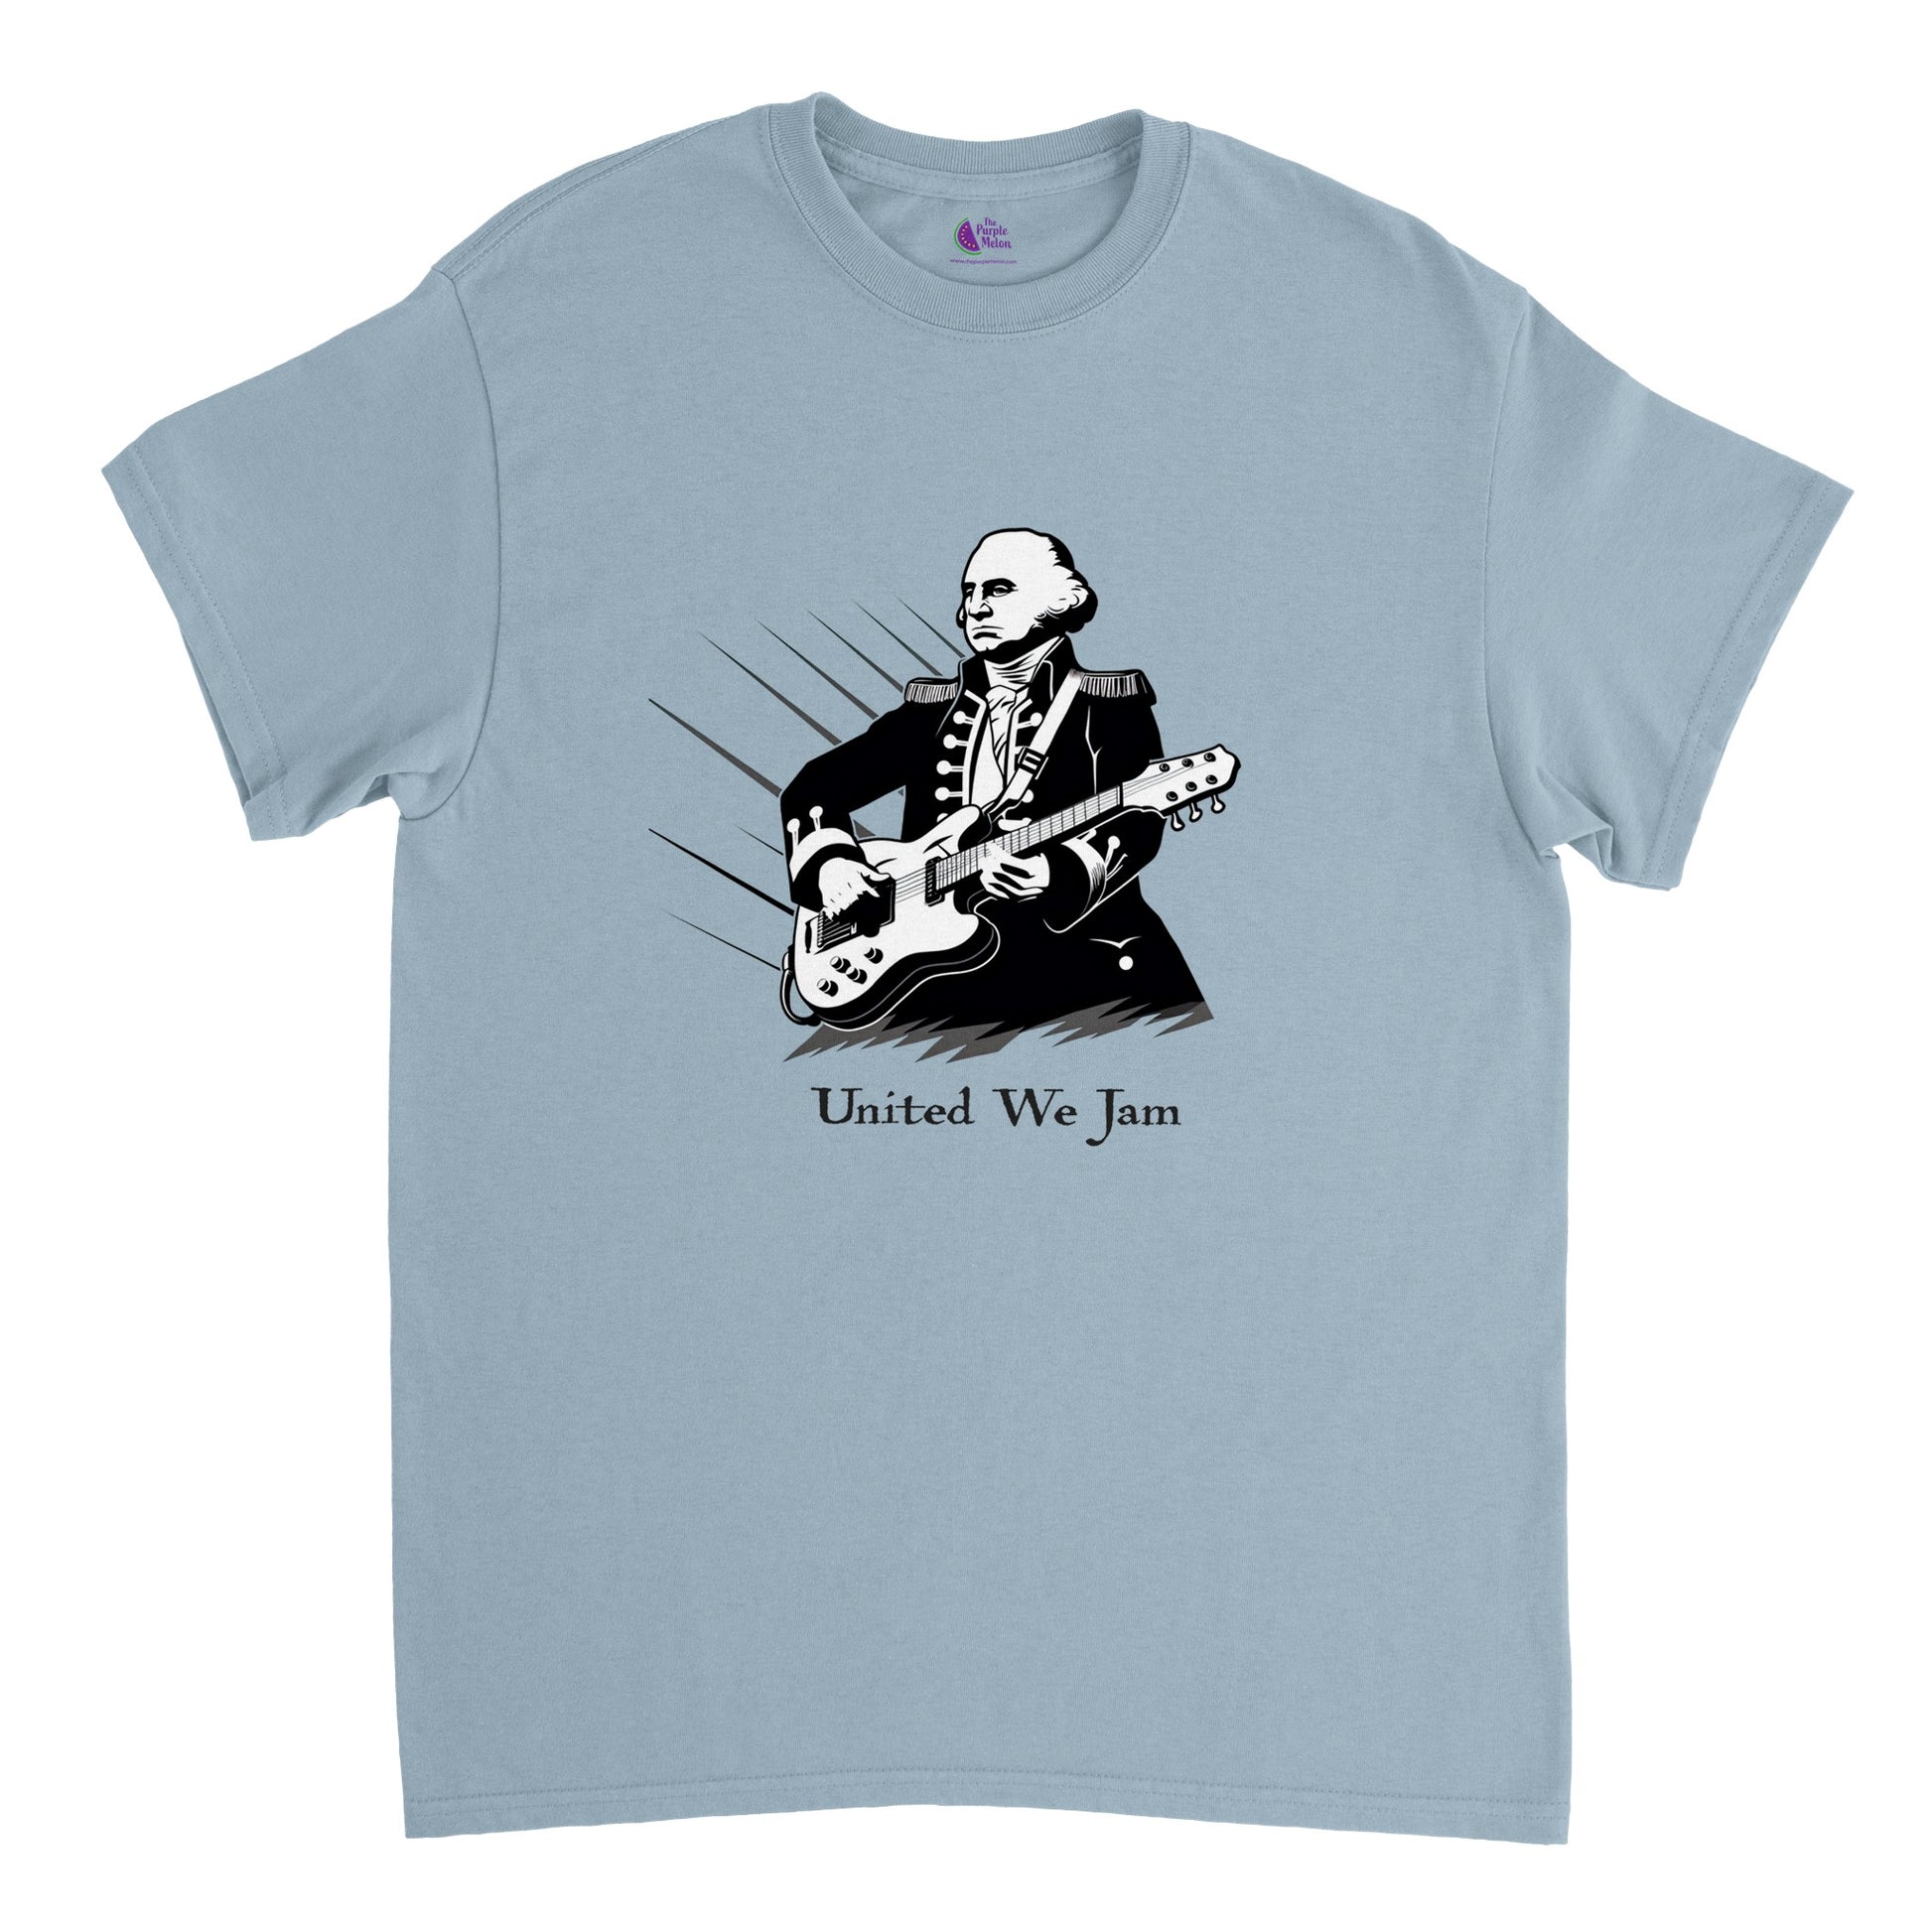 light blue t-shirt with print of George Washington playing the guitar and the caption United We Jam